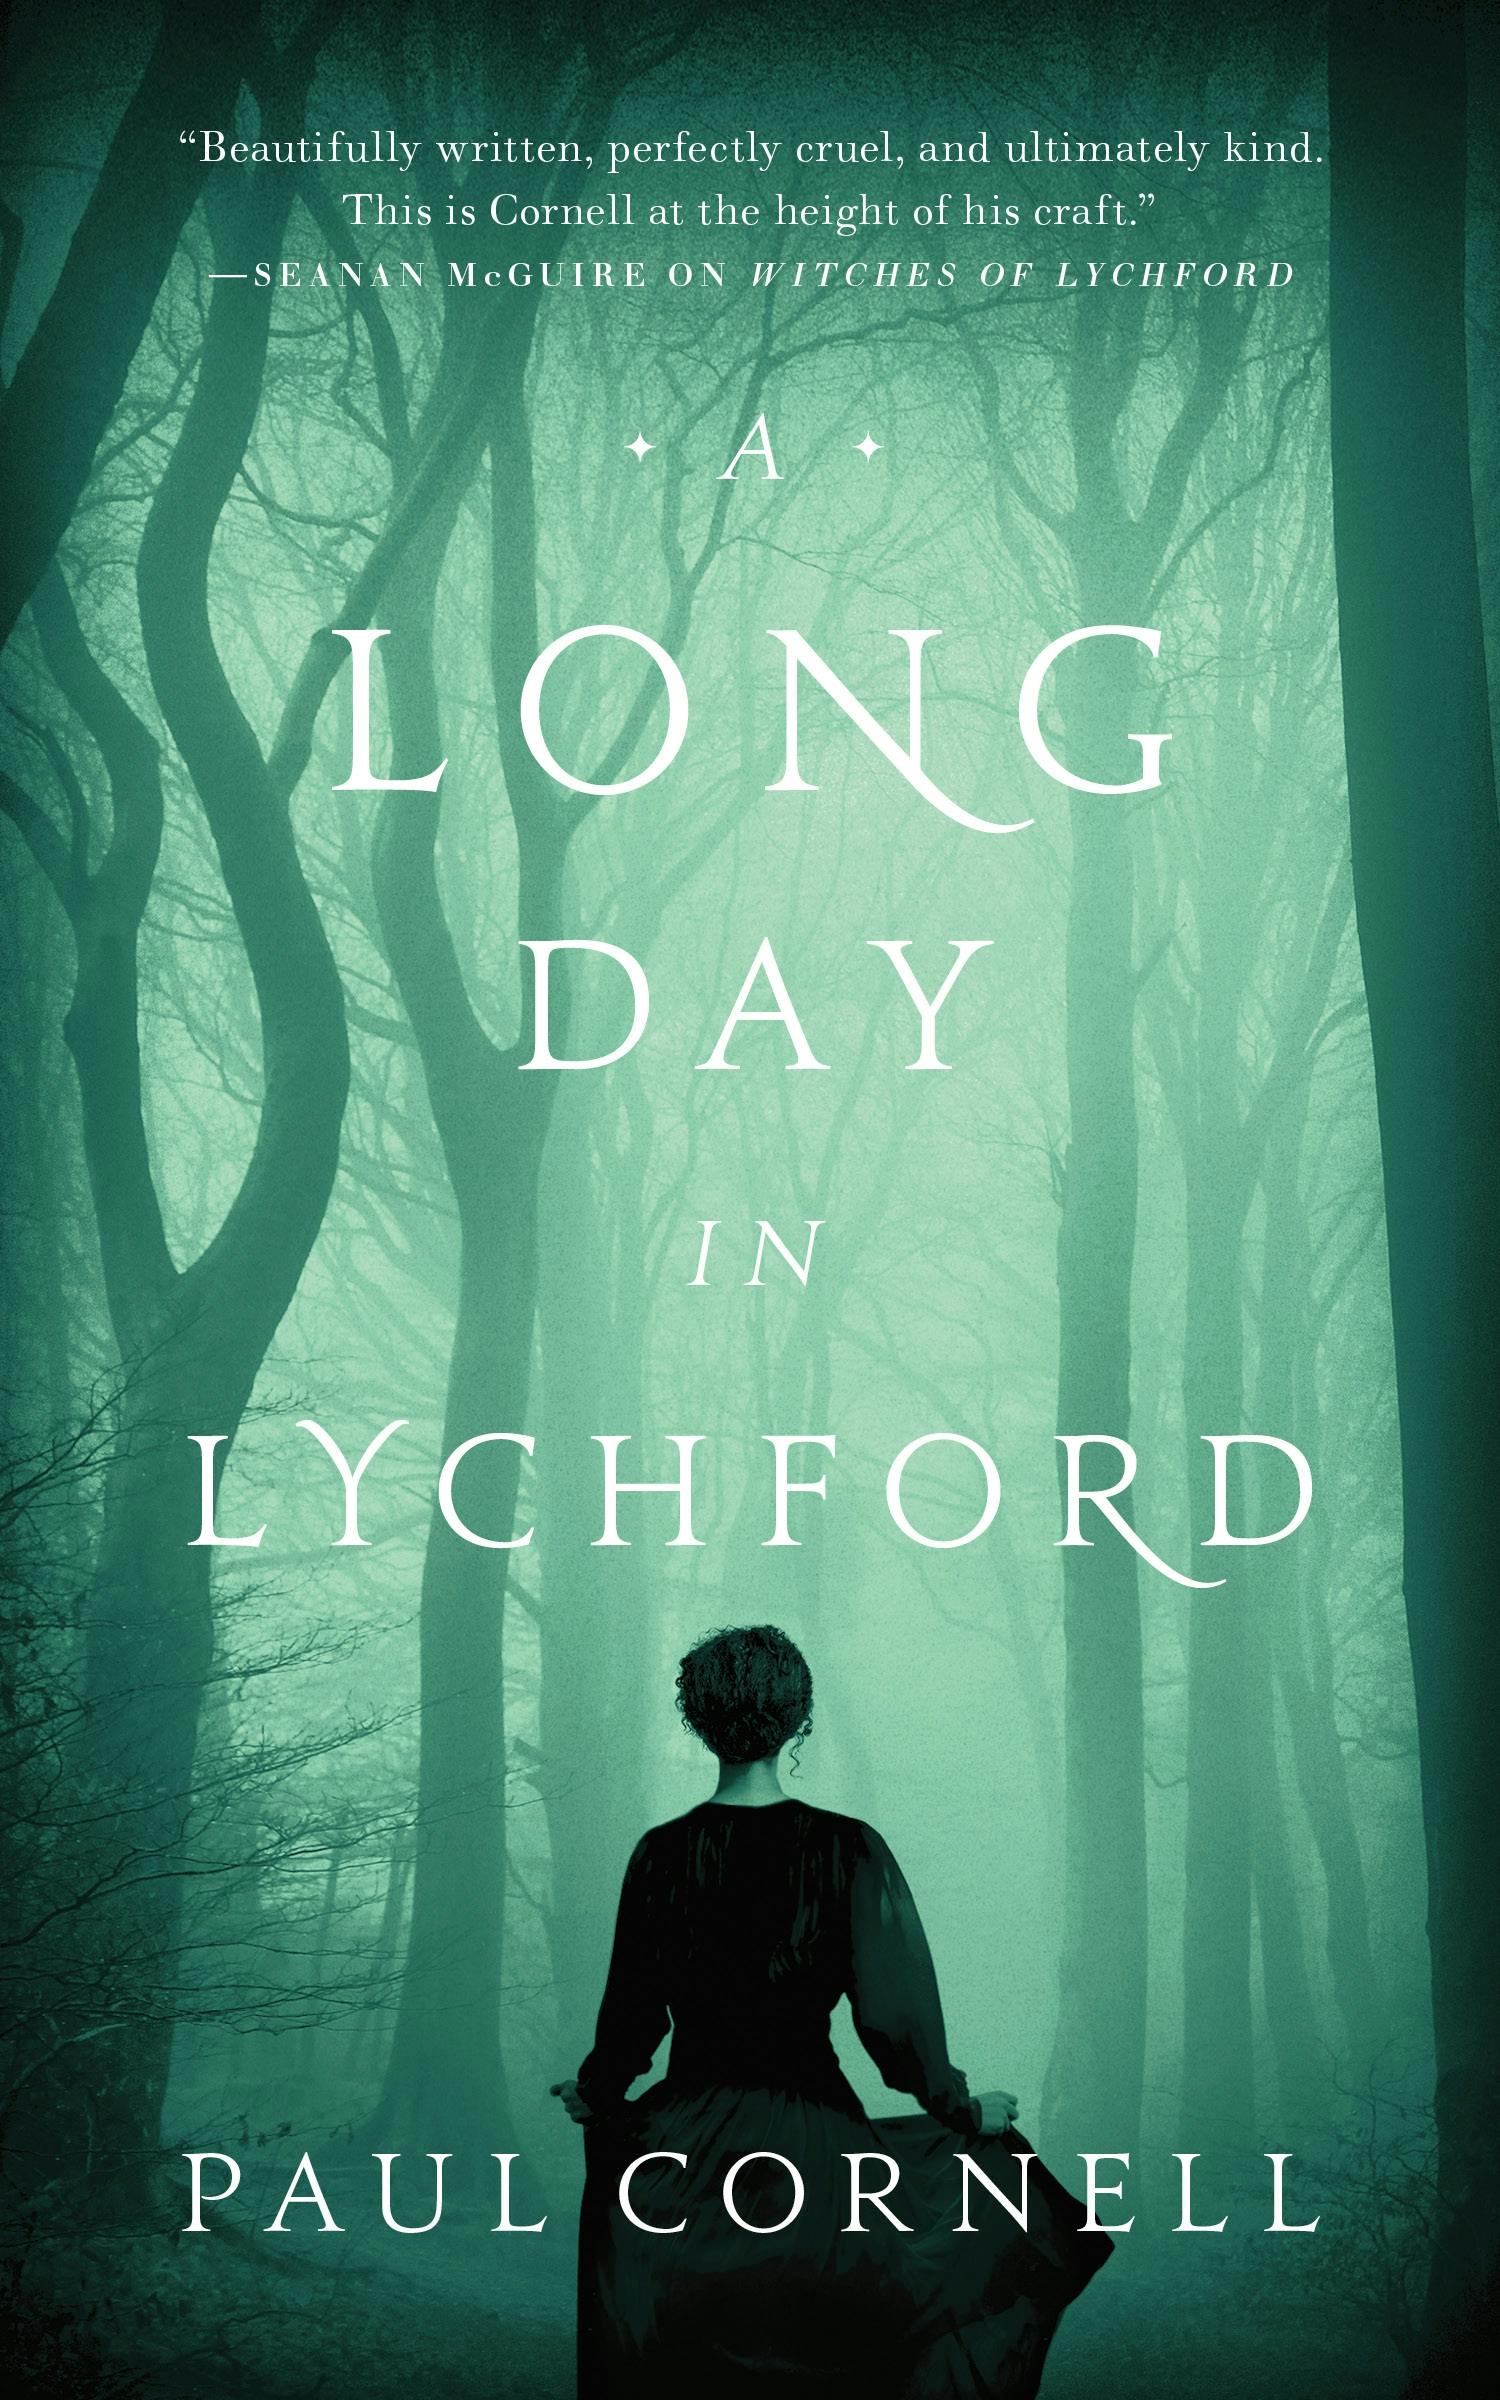 Cover for the book titled as: A Long Day in Lychford